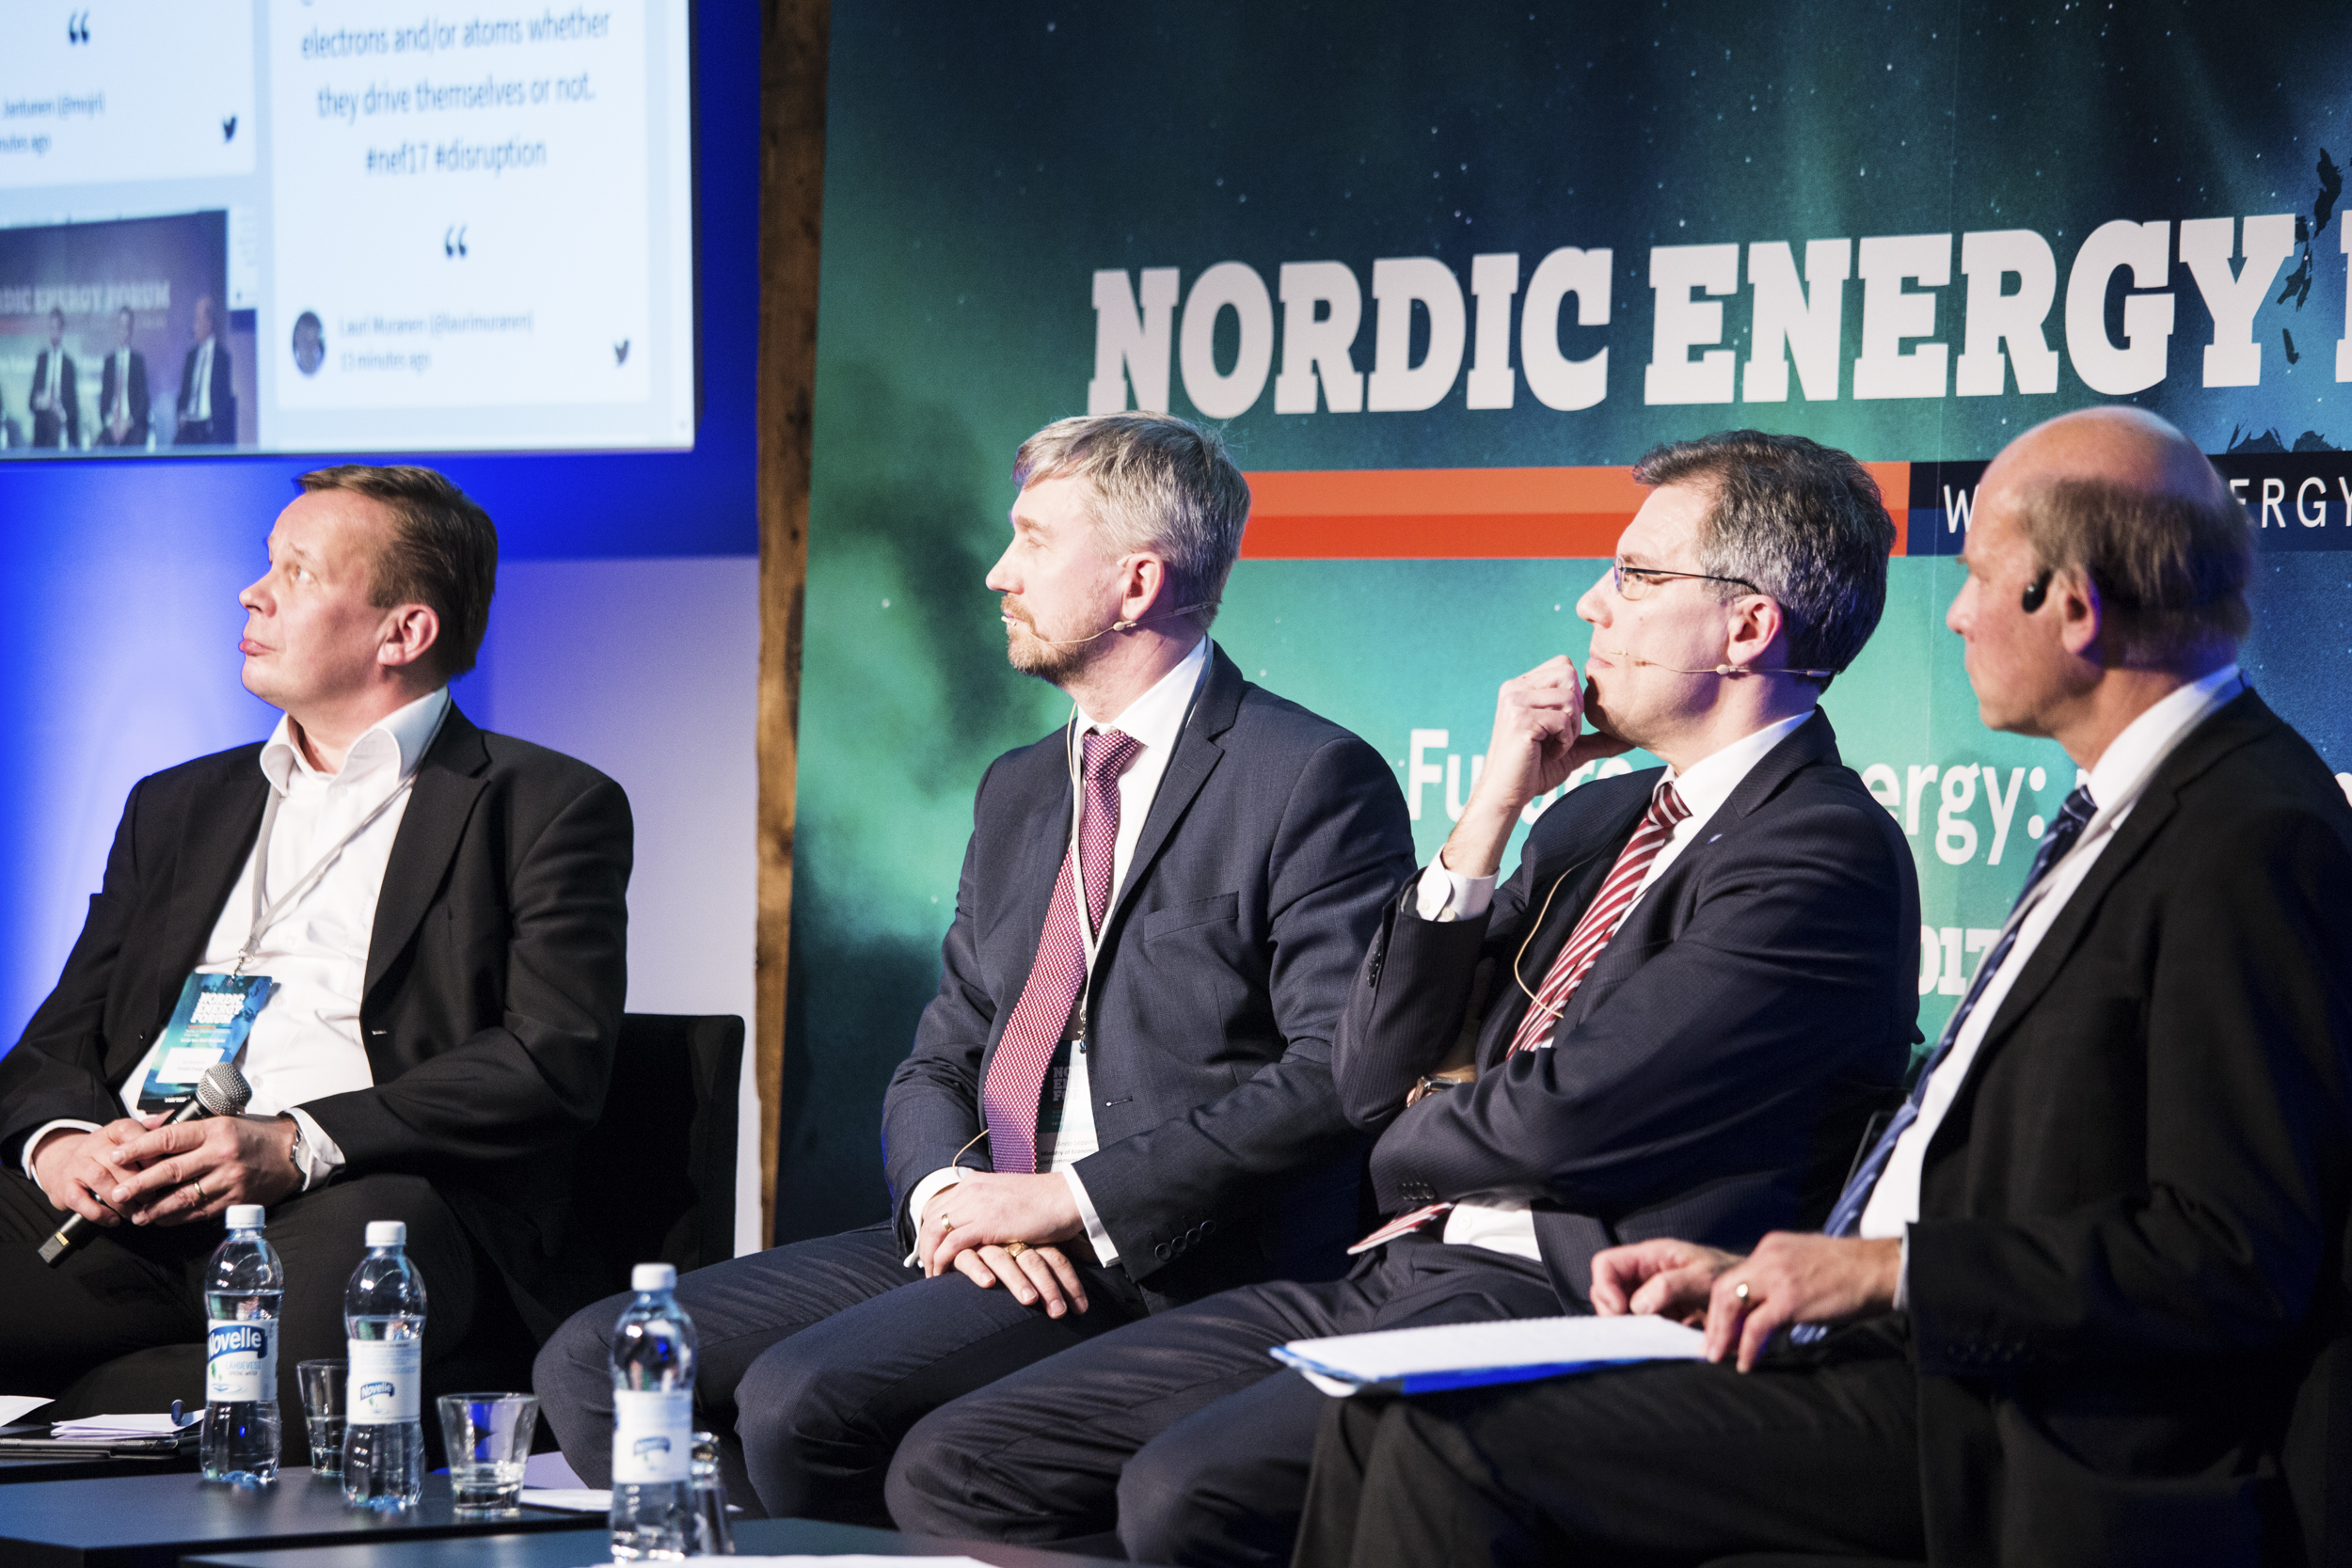 The future of energy debated at the Nordic Energy Forum3